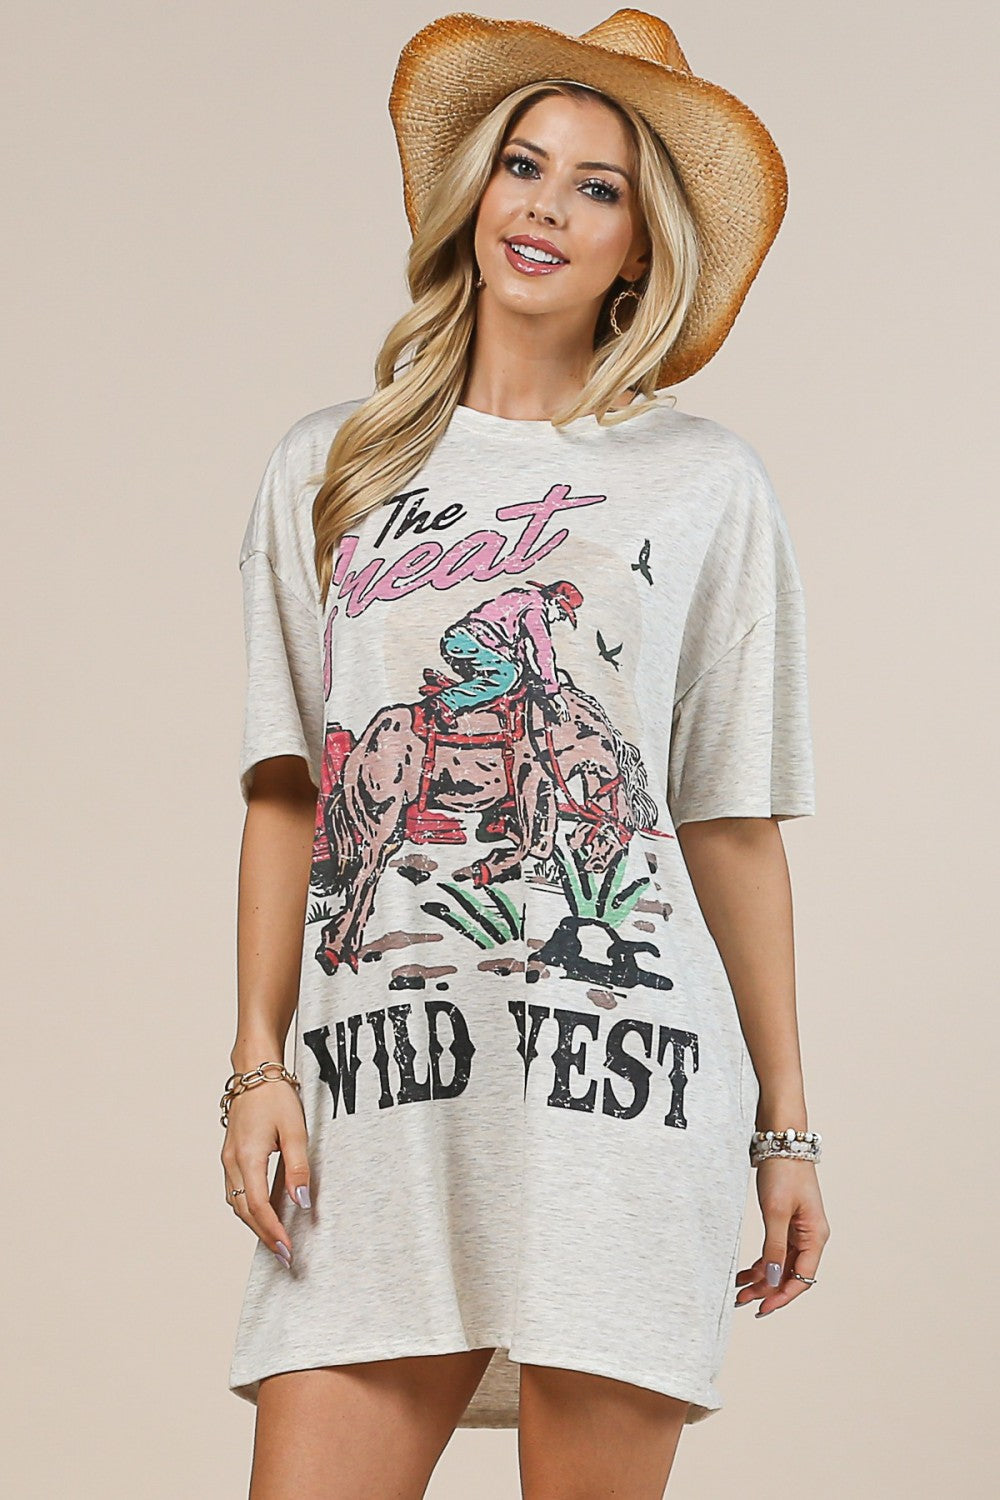 "Wild West" Graphic Shirt Dress BACK IN STOCK!!!